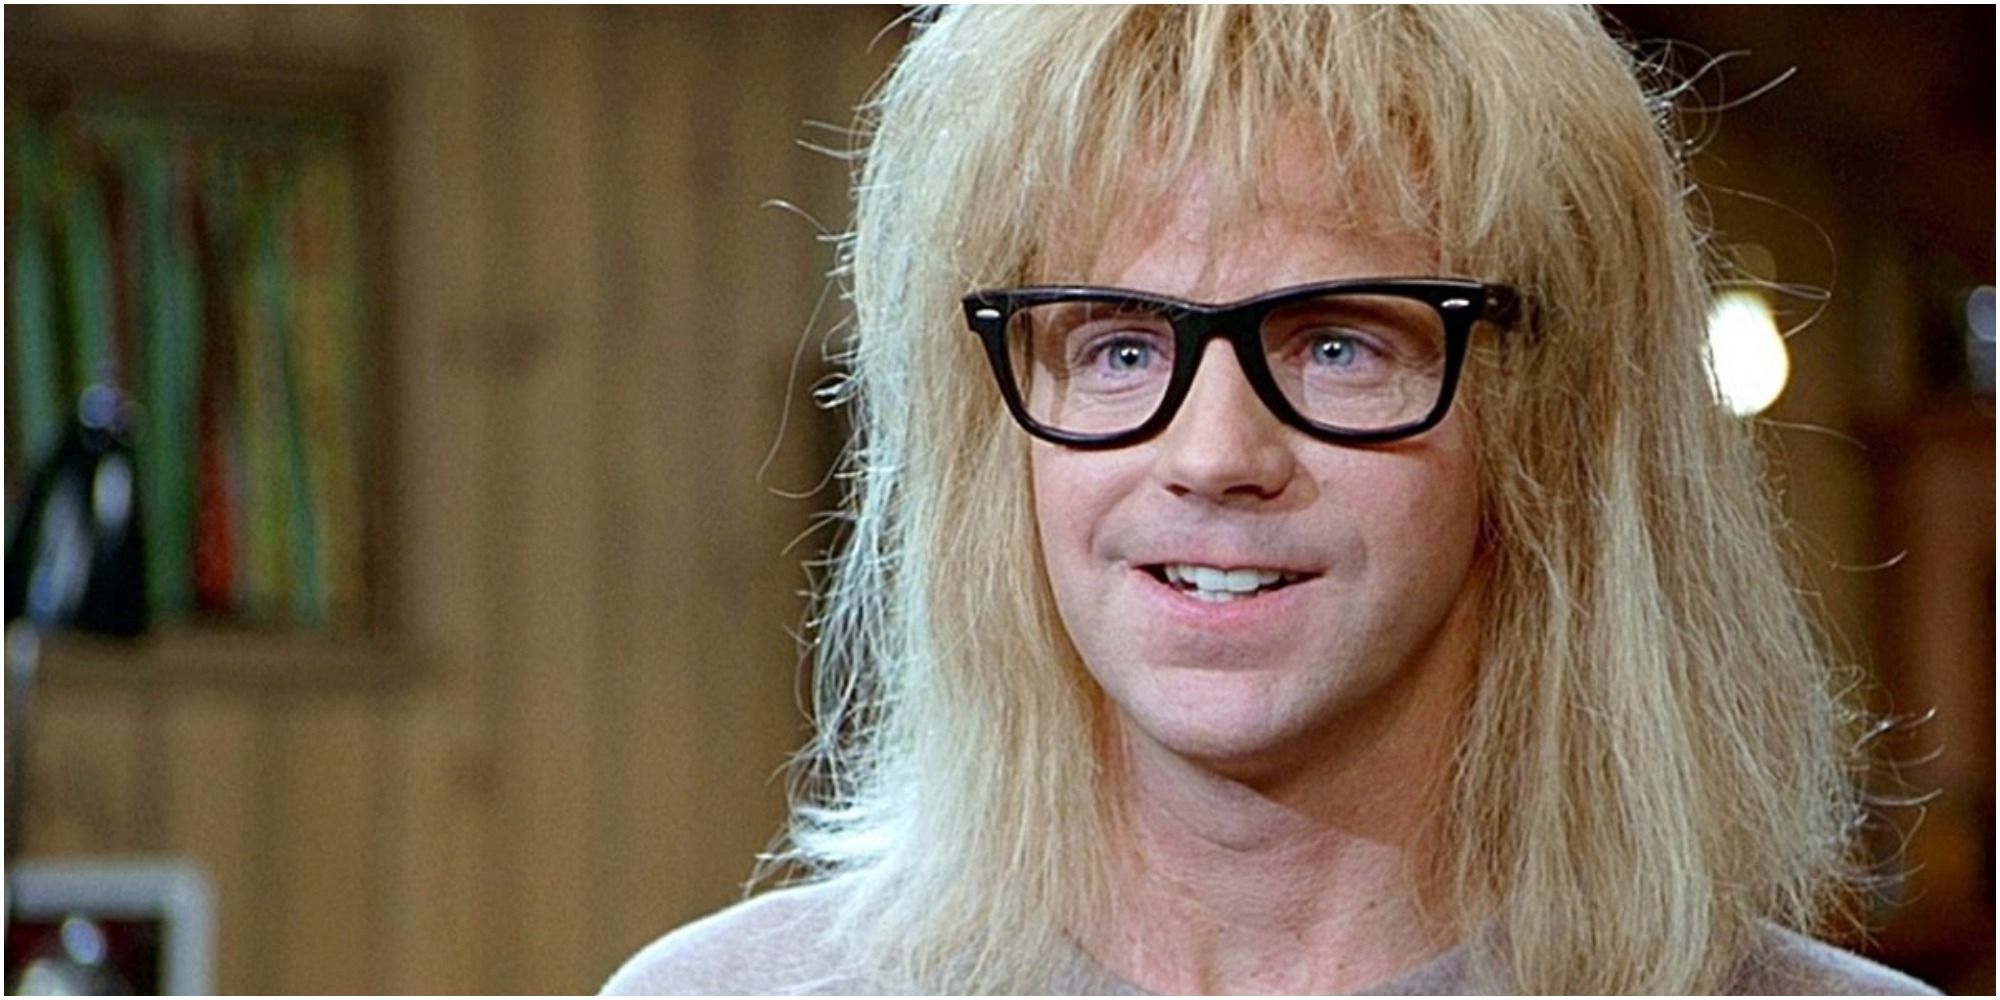 Dana Carvey from SNL grits his teeth while wearing glasses.